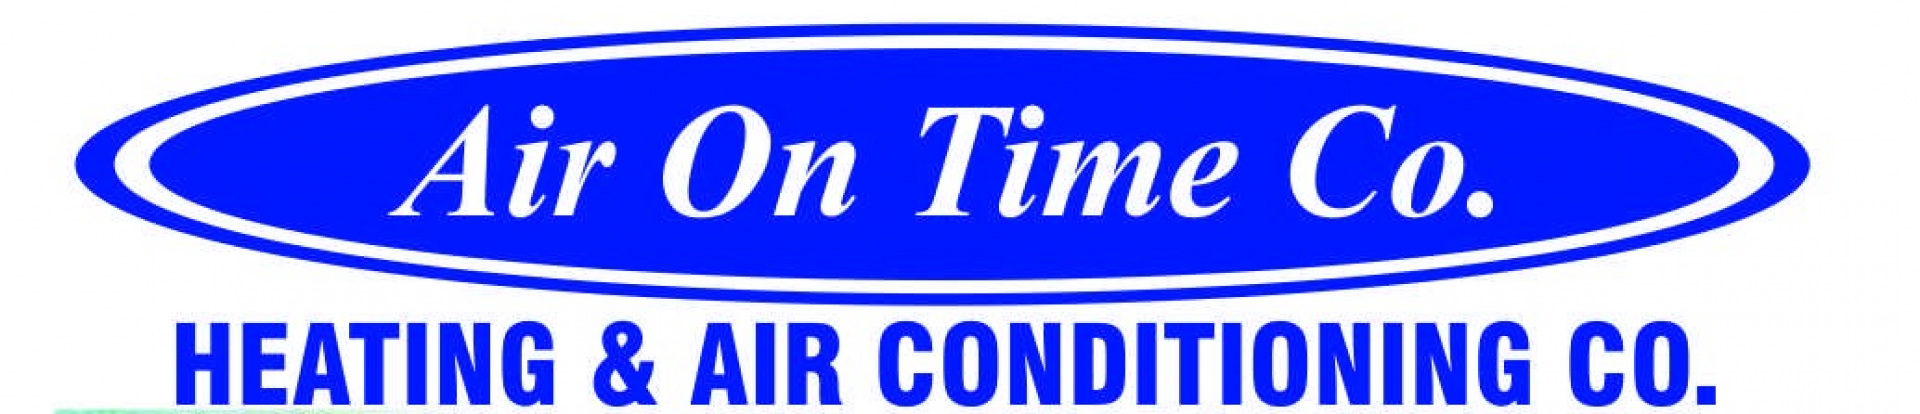 Air On Time Co. logo